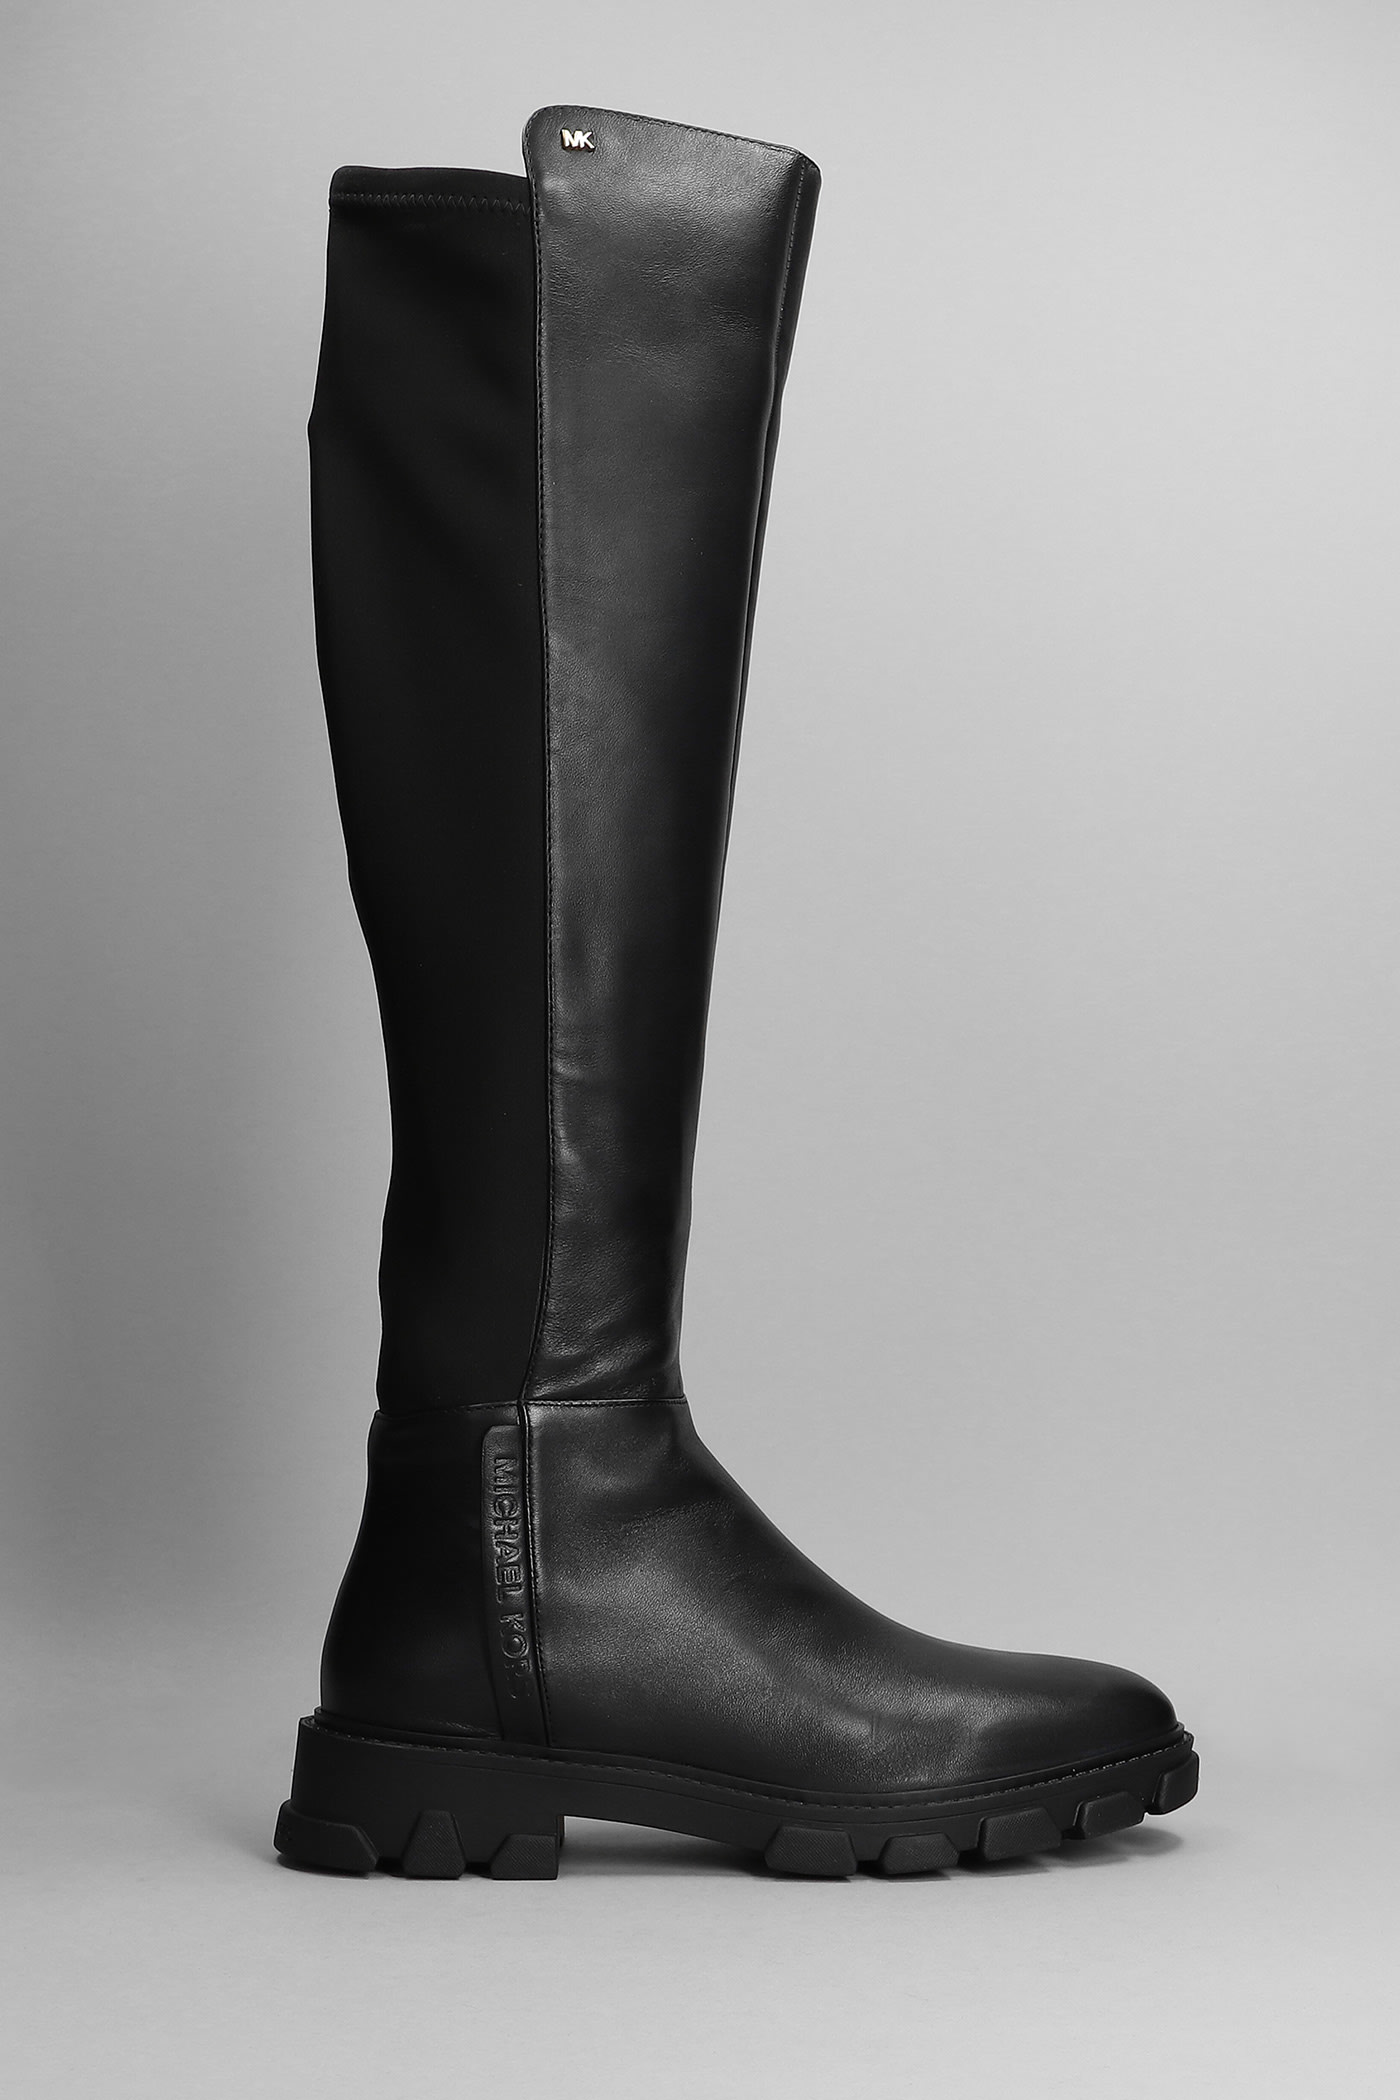 MICHAEL KORS RIDLEY LOW HEELS BOOTS IN BLACK LEATHER